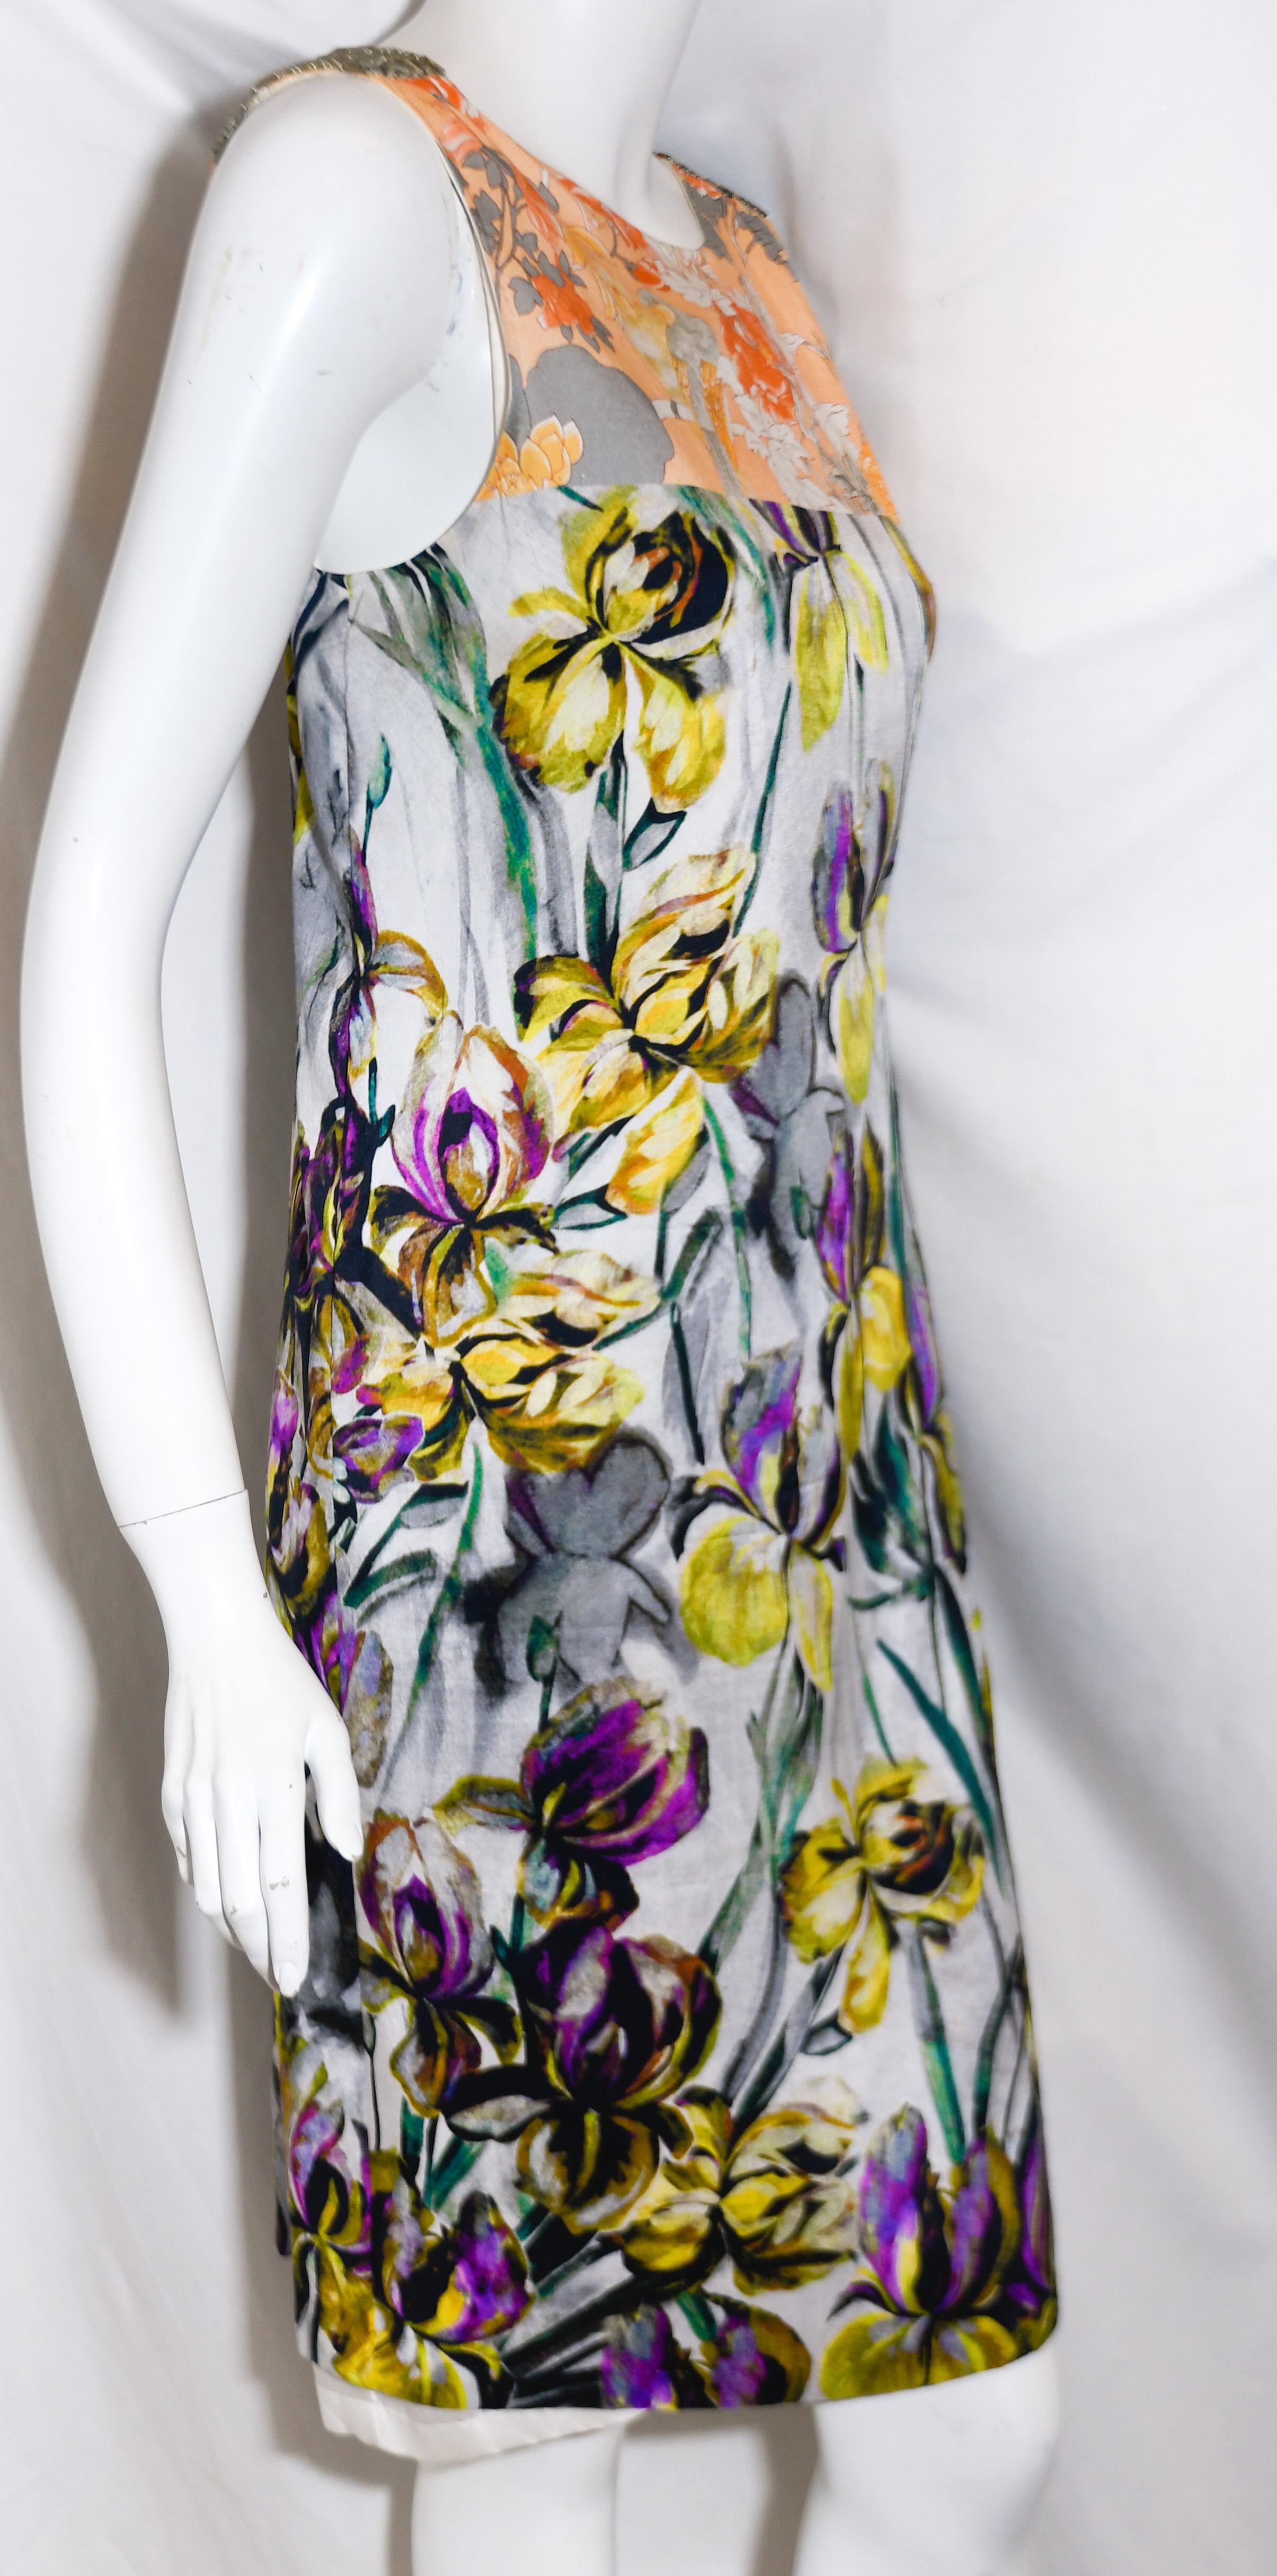 Dries Van Noten Silk Floral Multi Sleeveless Dress In Excellent Condition For Sale In Palm Beach, FL